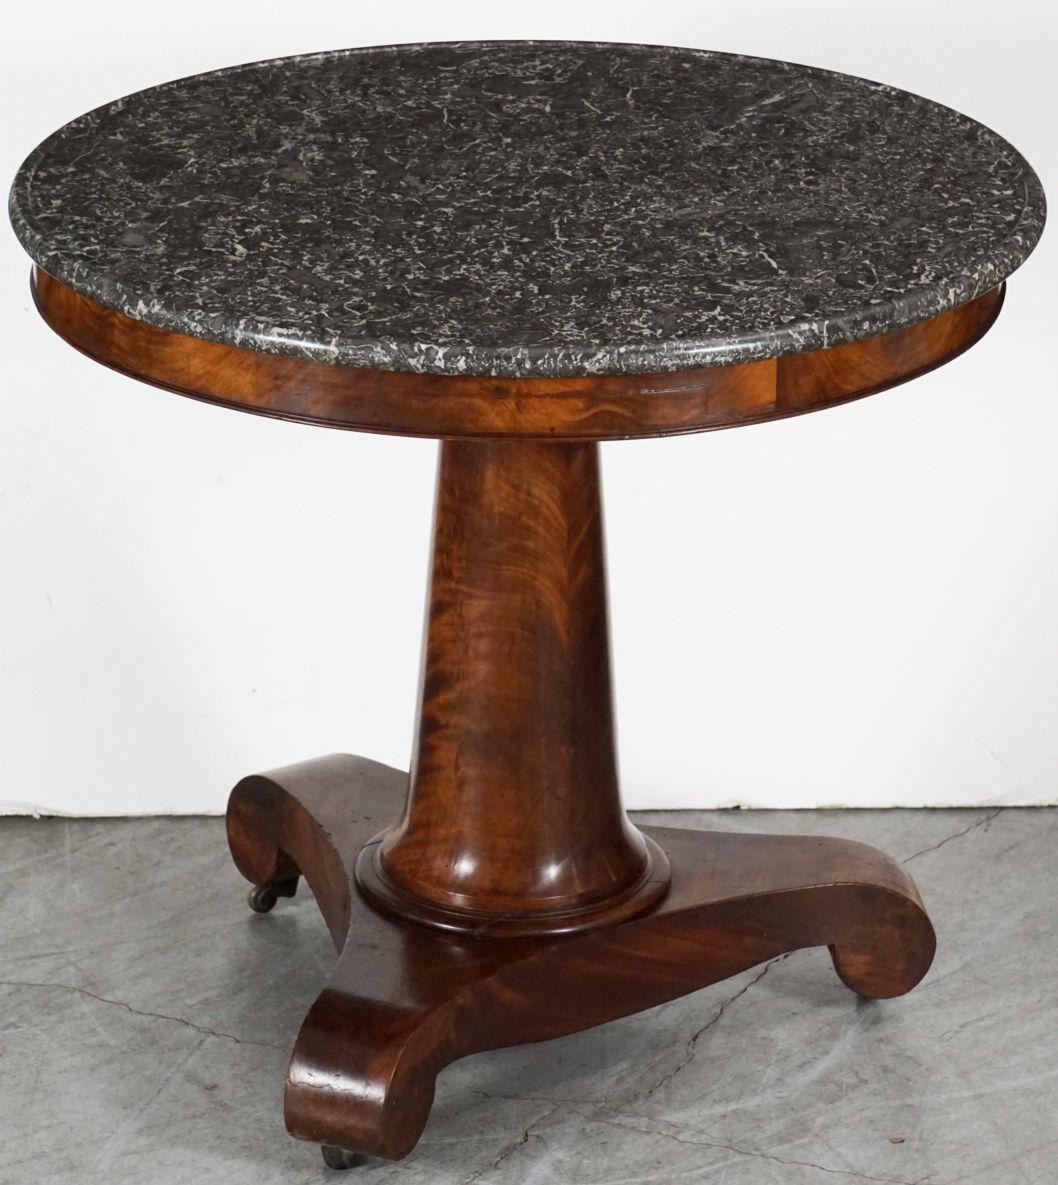 A fine French guéridon or round table from the 19th century - a beautifully figured mahogany column supporting the circular figured marble top, set upon a patinated tri-form base with scroll-form legs and resting on brass casters.